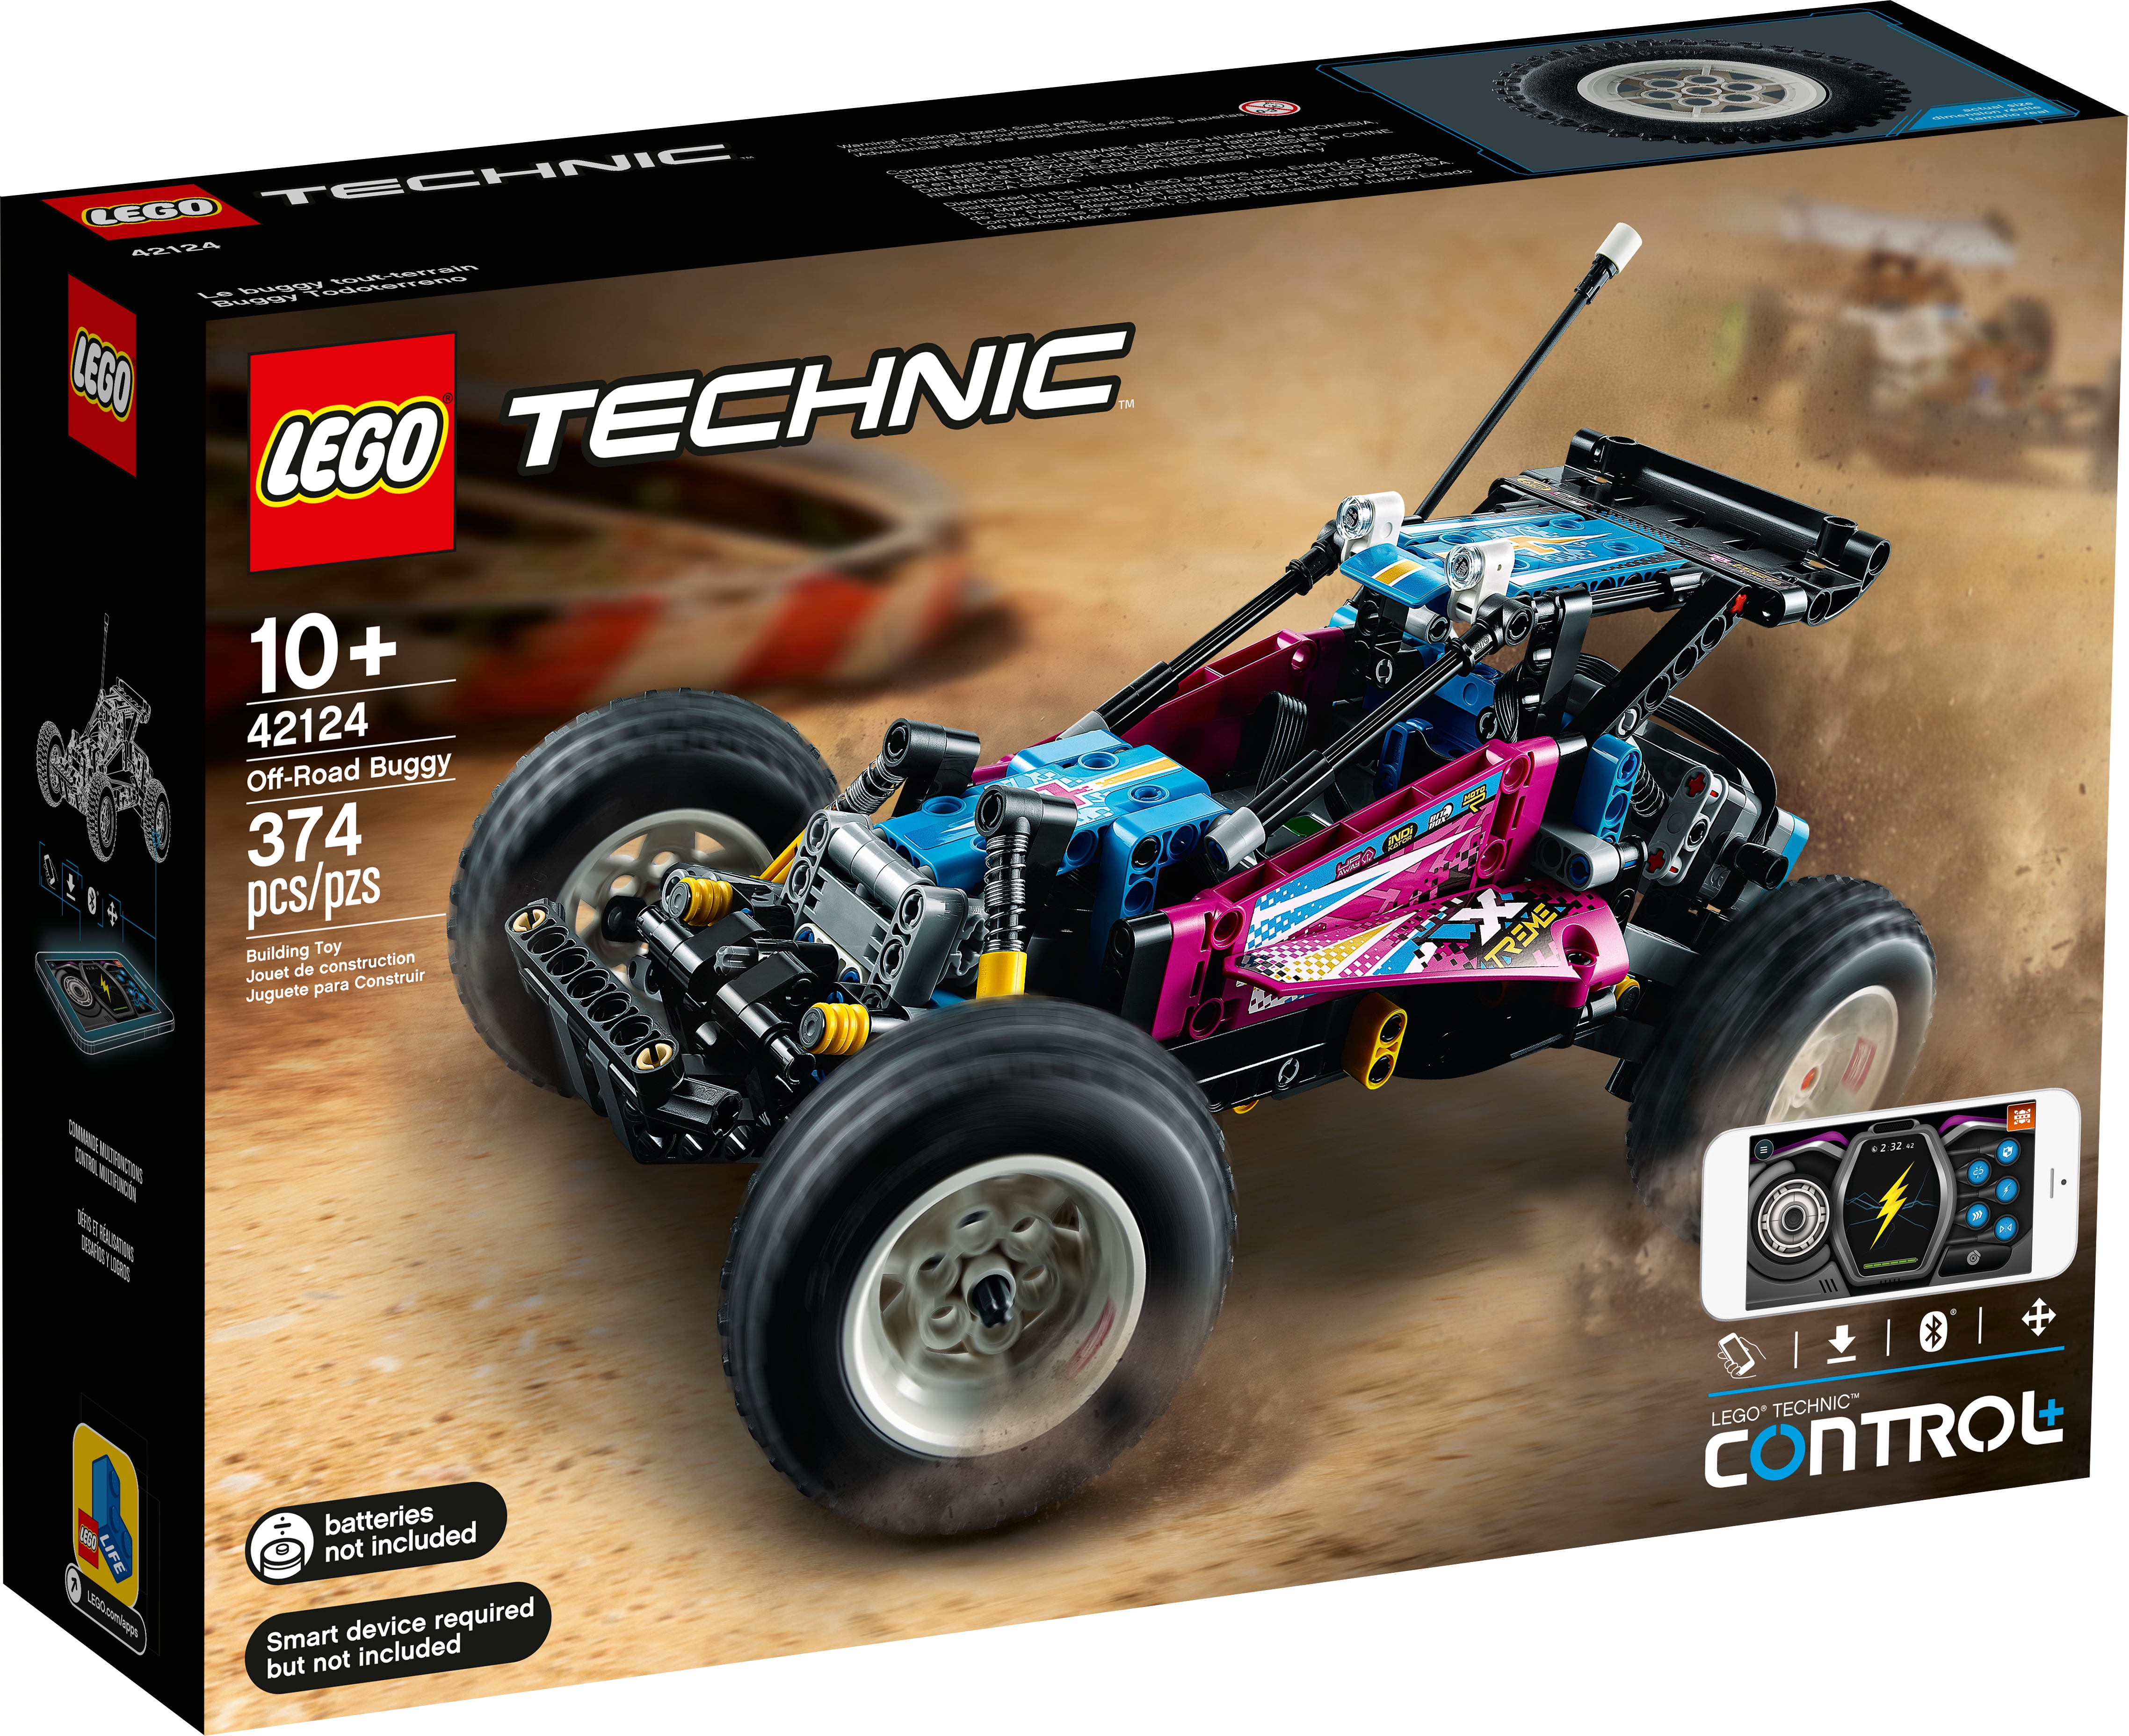 LEGO 42124 Technic Off-Road Buggy CONTROL App-Controlled Retro RC Car Toy for Kids